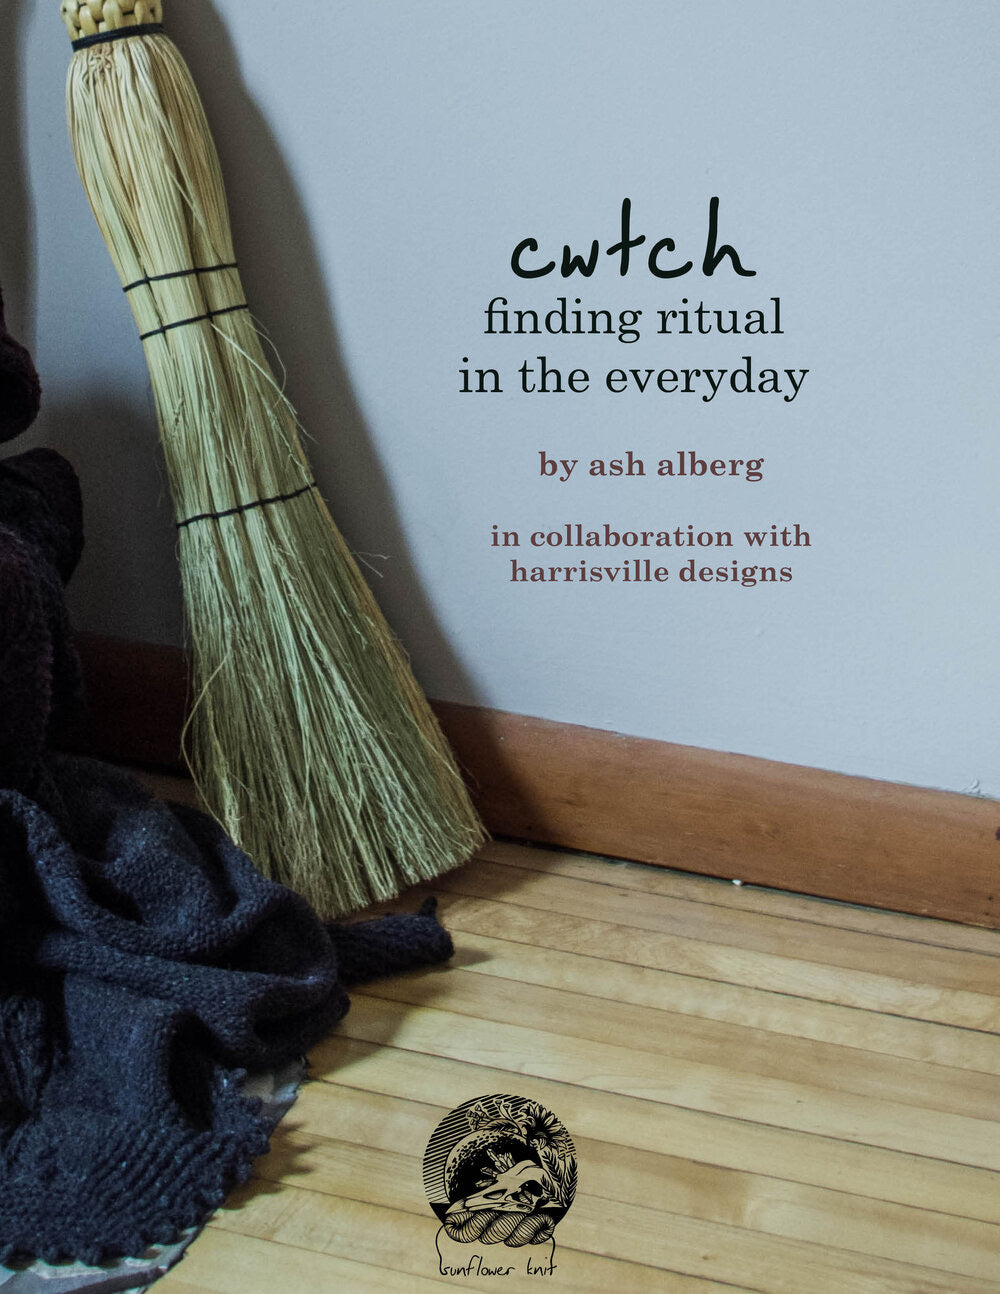 “cwtch: finding ritual in the everyday” by Ash Alberg